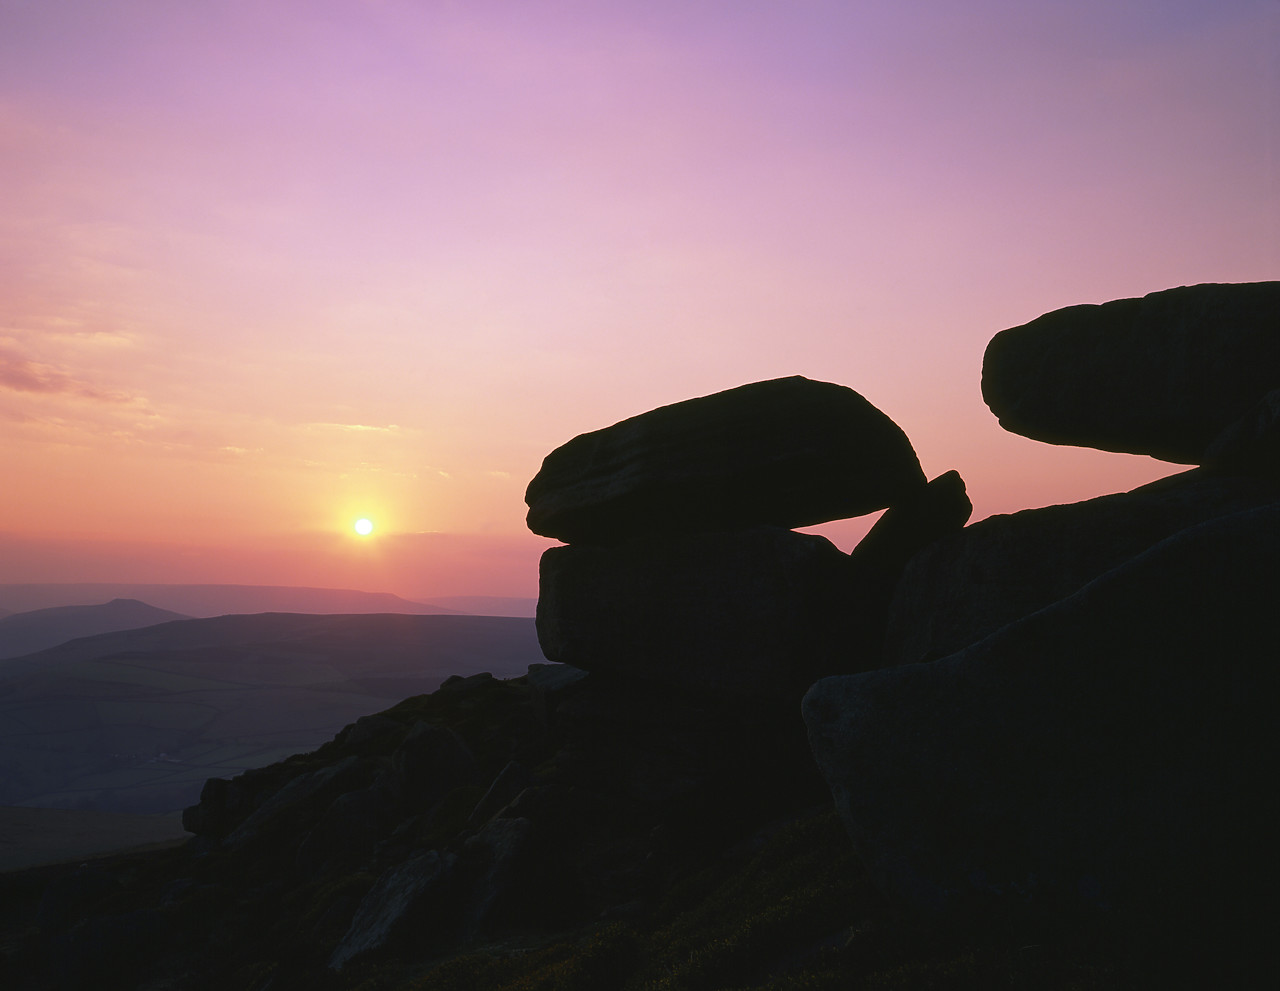 #913374-1 - Rock Outcroppings at Sunset, Stanage Edge, Peak District National Park, Derbyshire, England